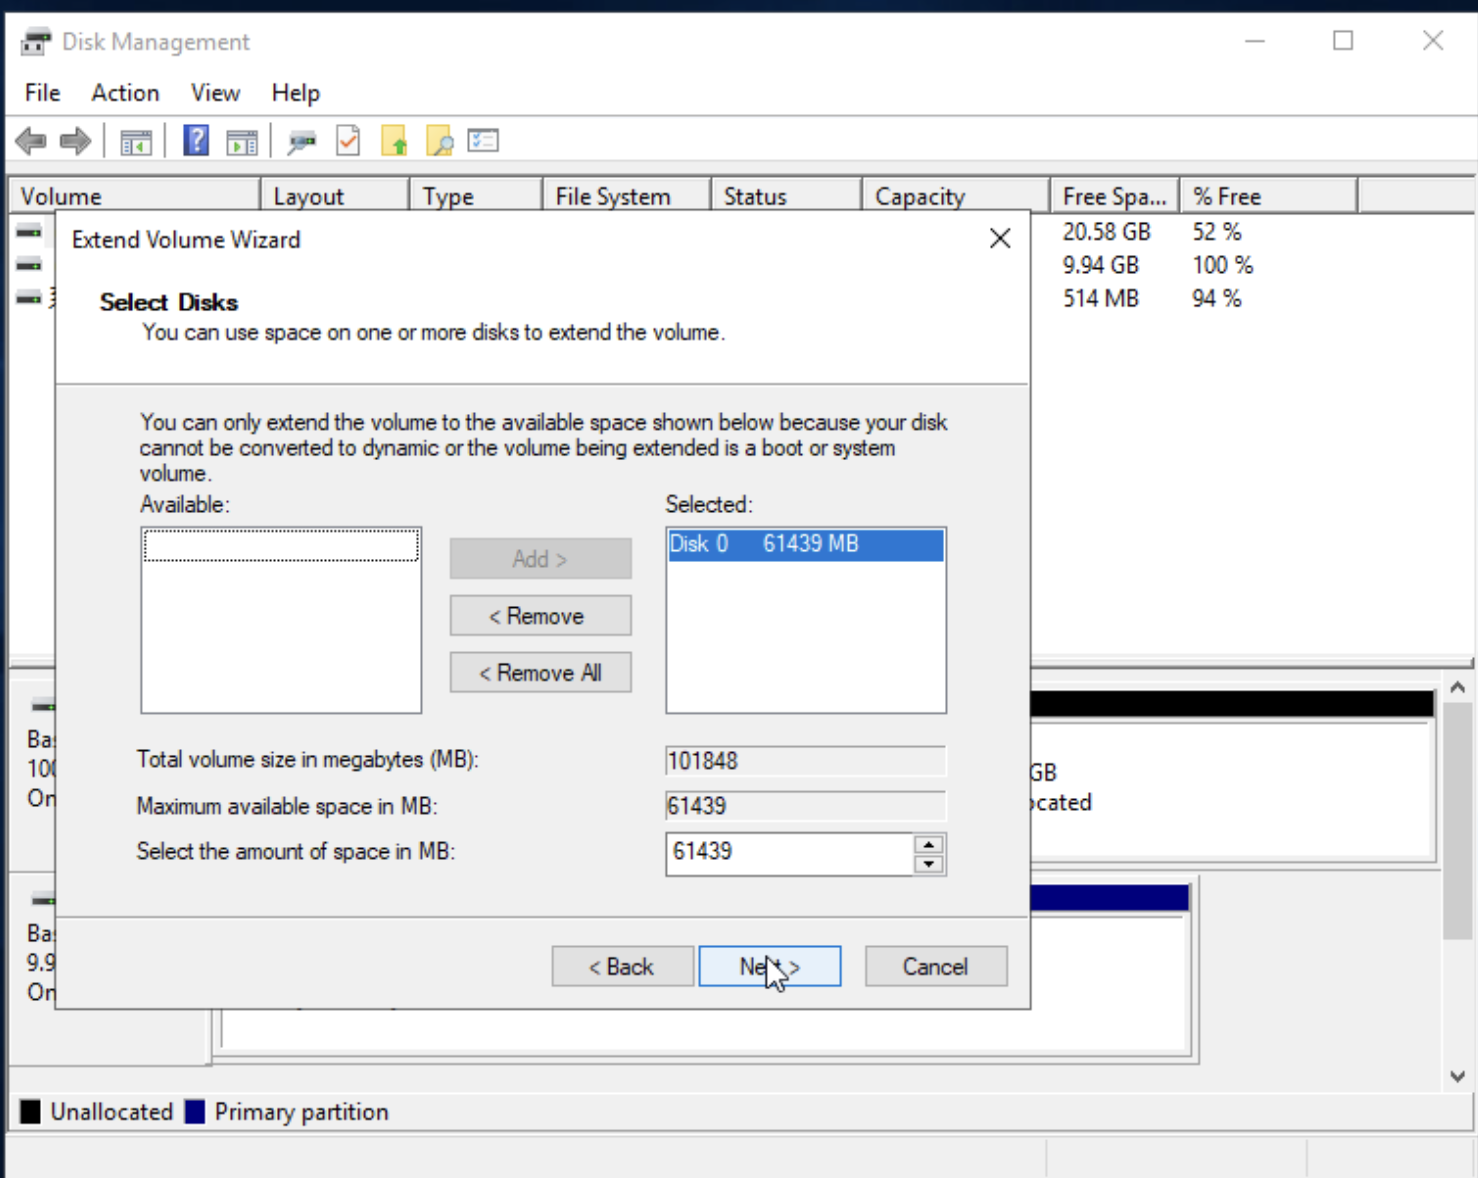 sysdisk_step3